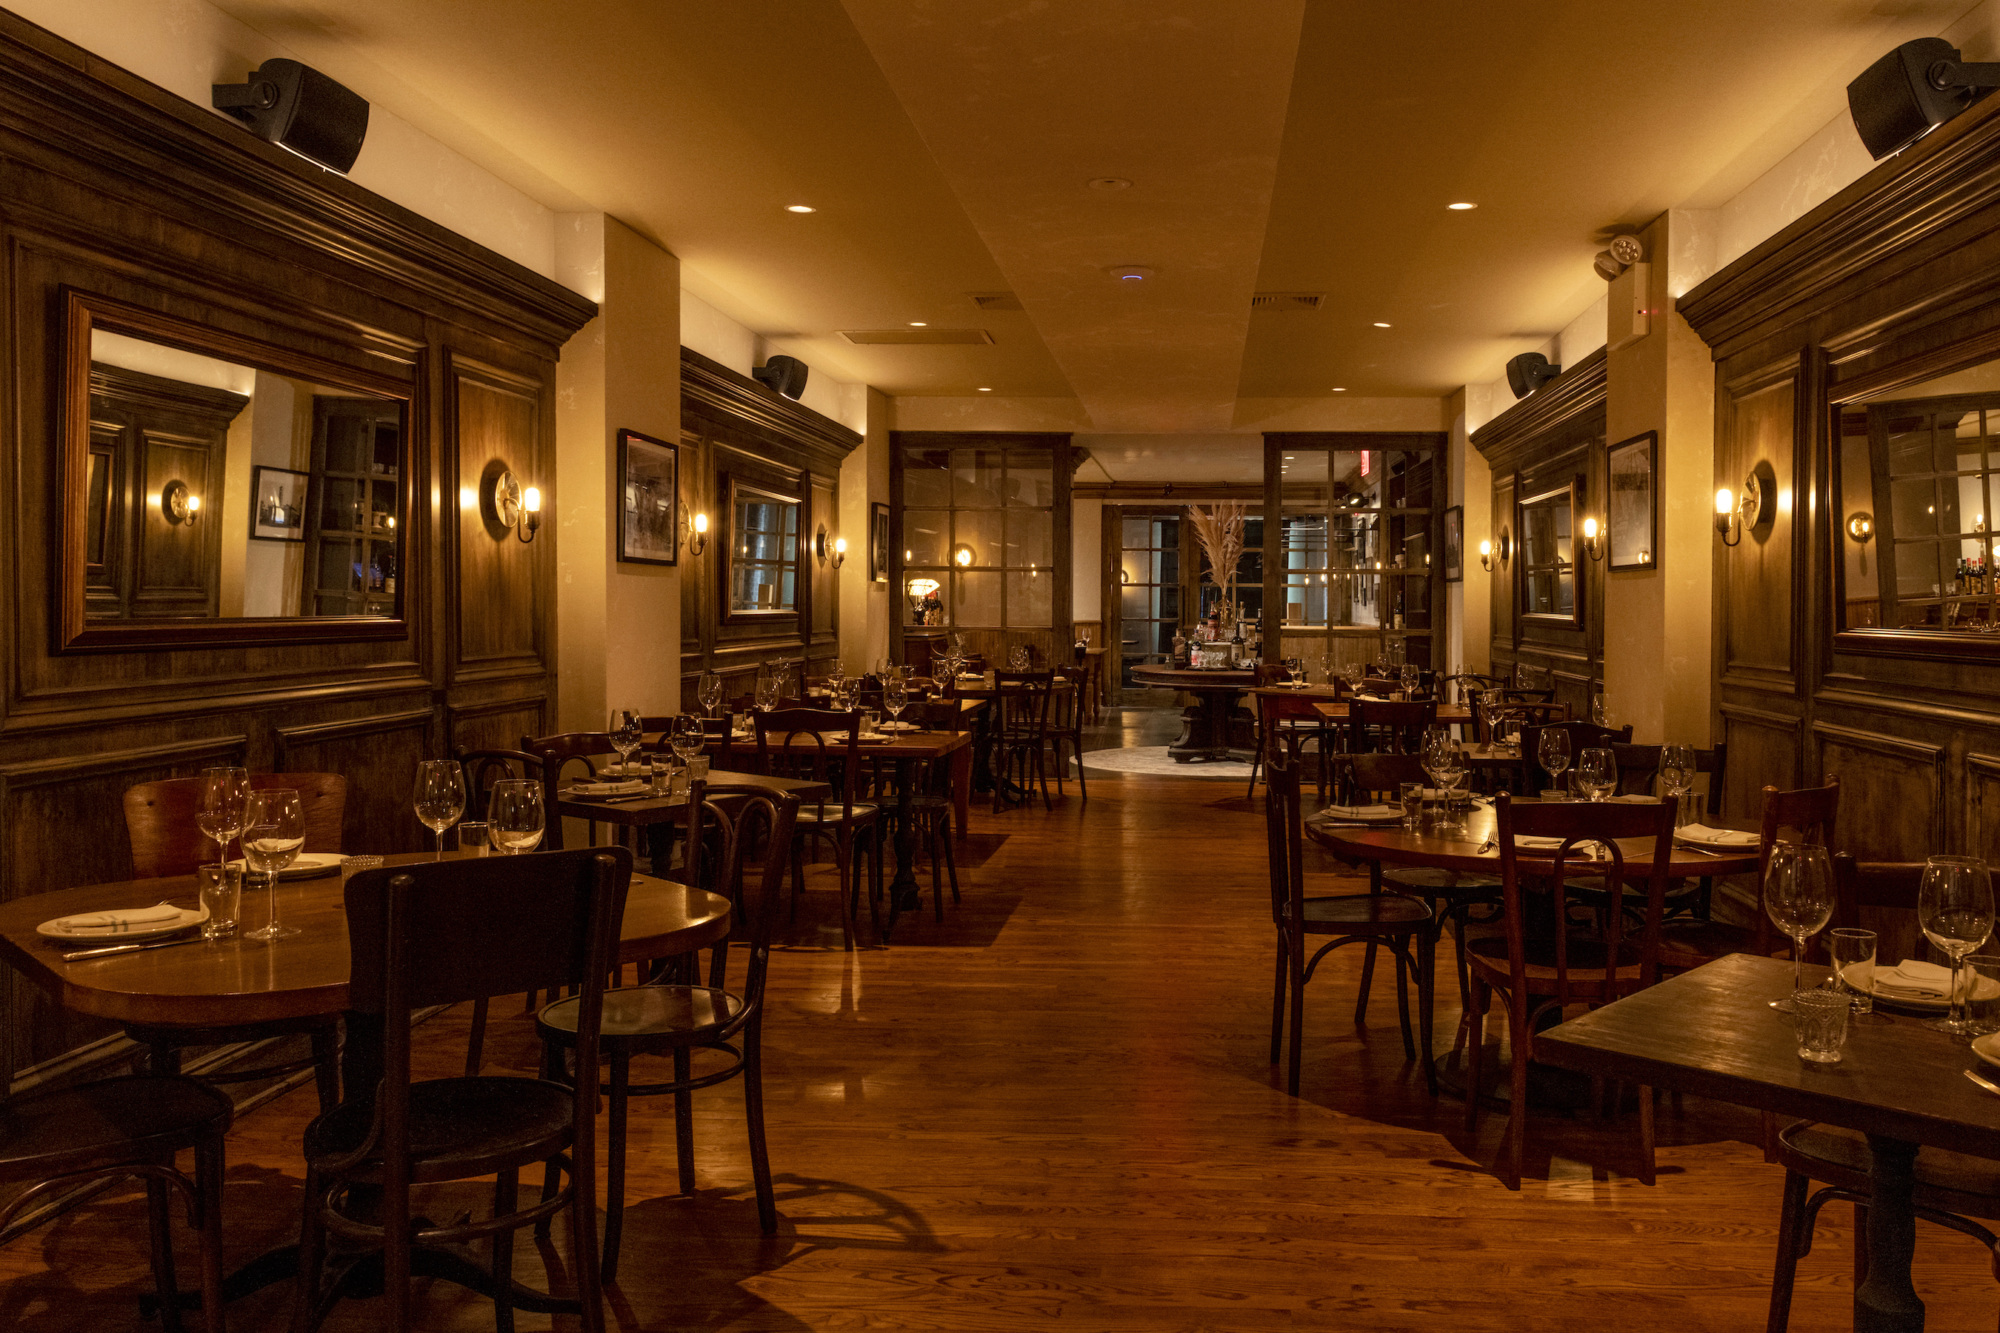 The dining room at One Fifth is spacious by New York standards.